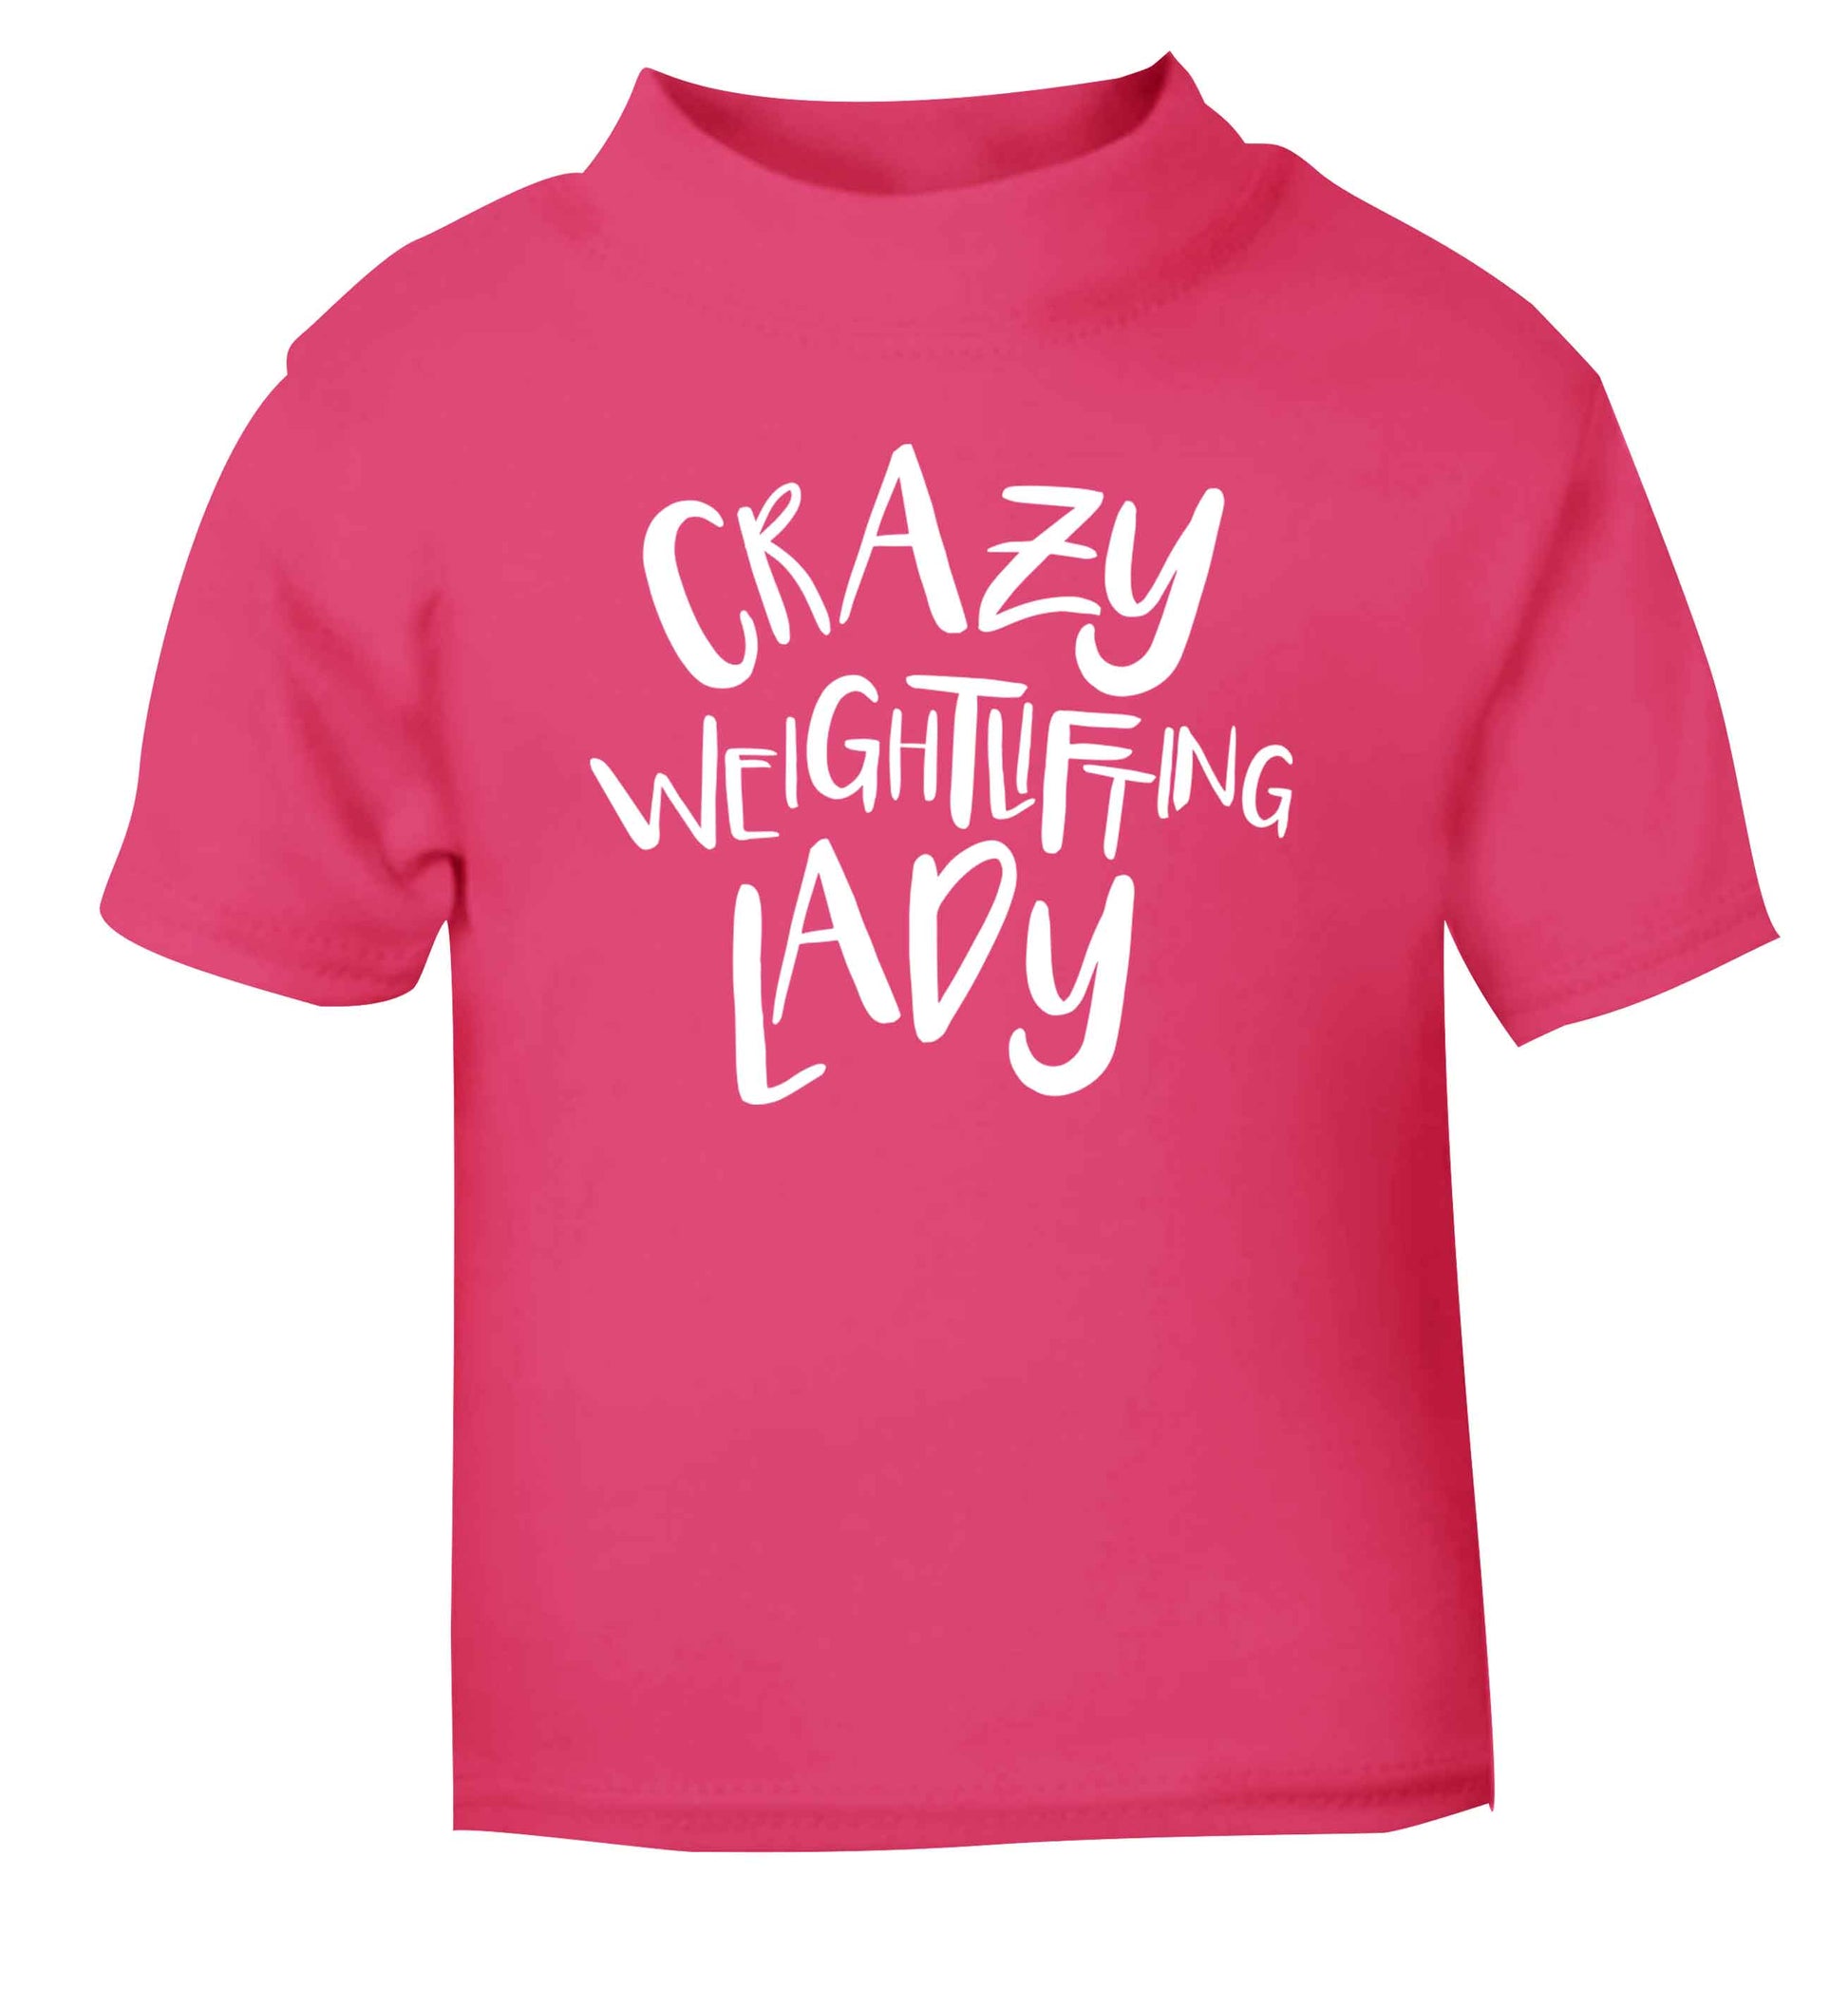 Crazy weightlifting lady pink Baby Toddler Tshirt 2 Years